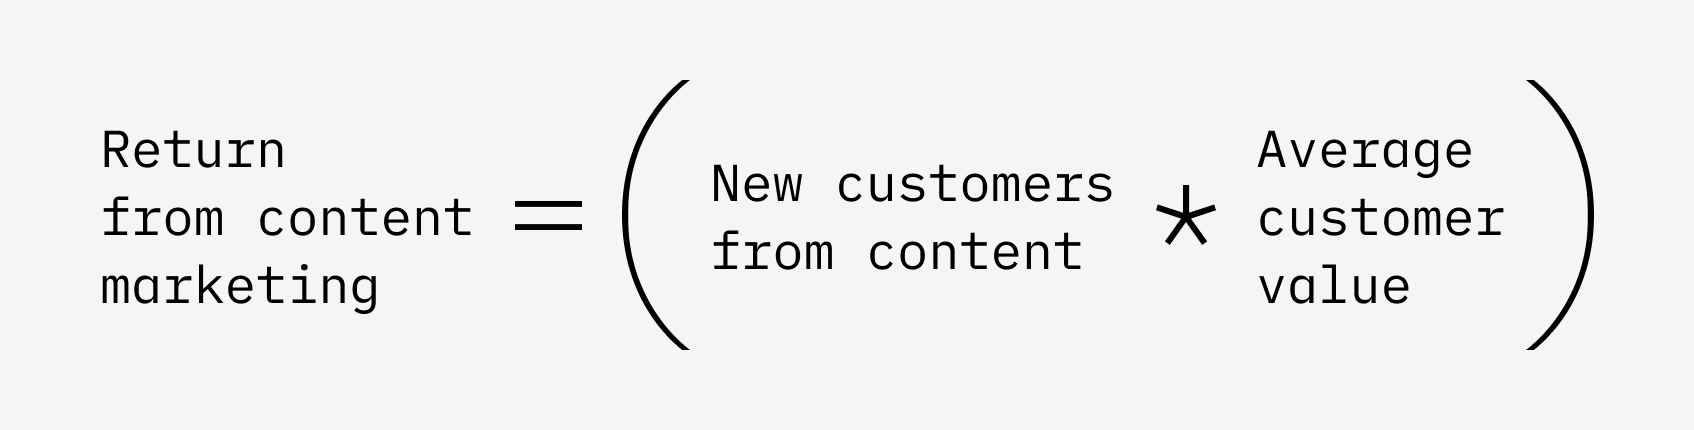 Return from content marketing = (New customers from content * ACV)